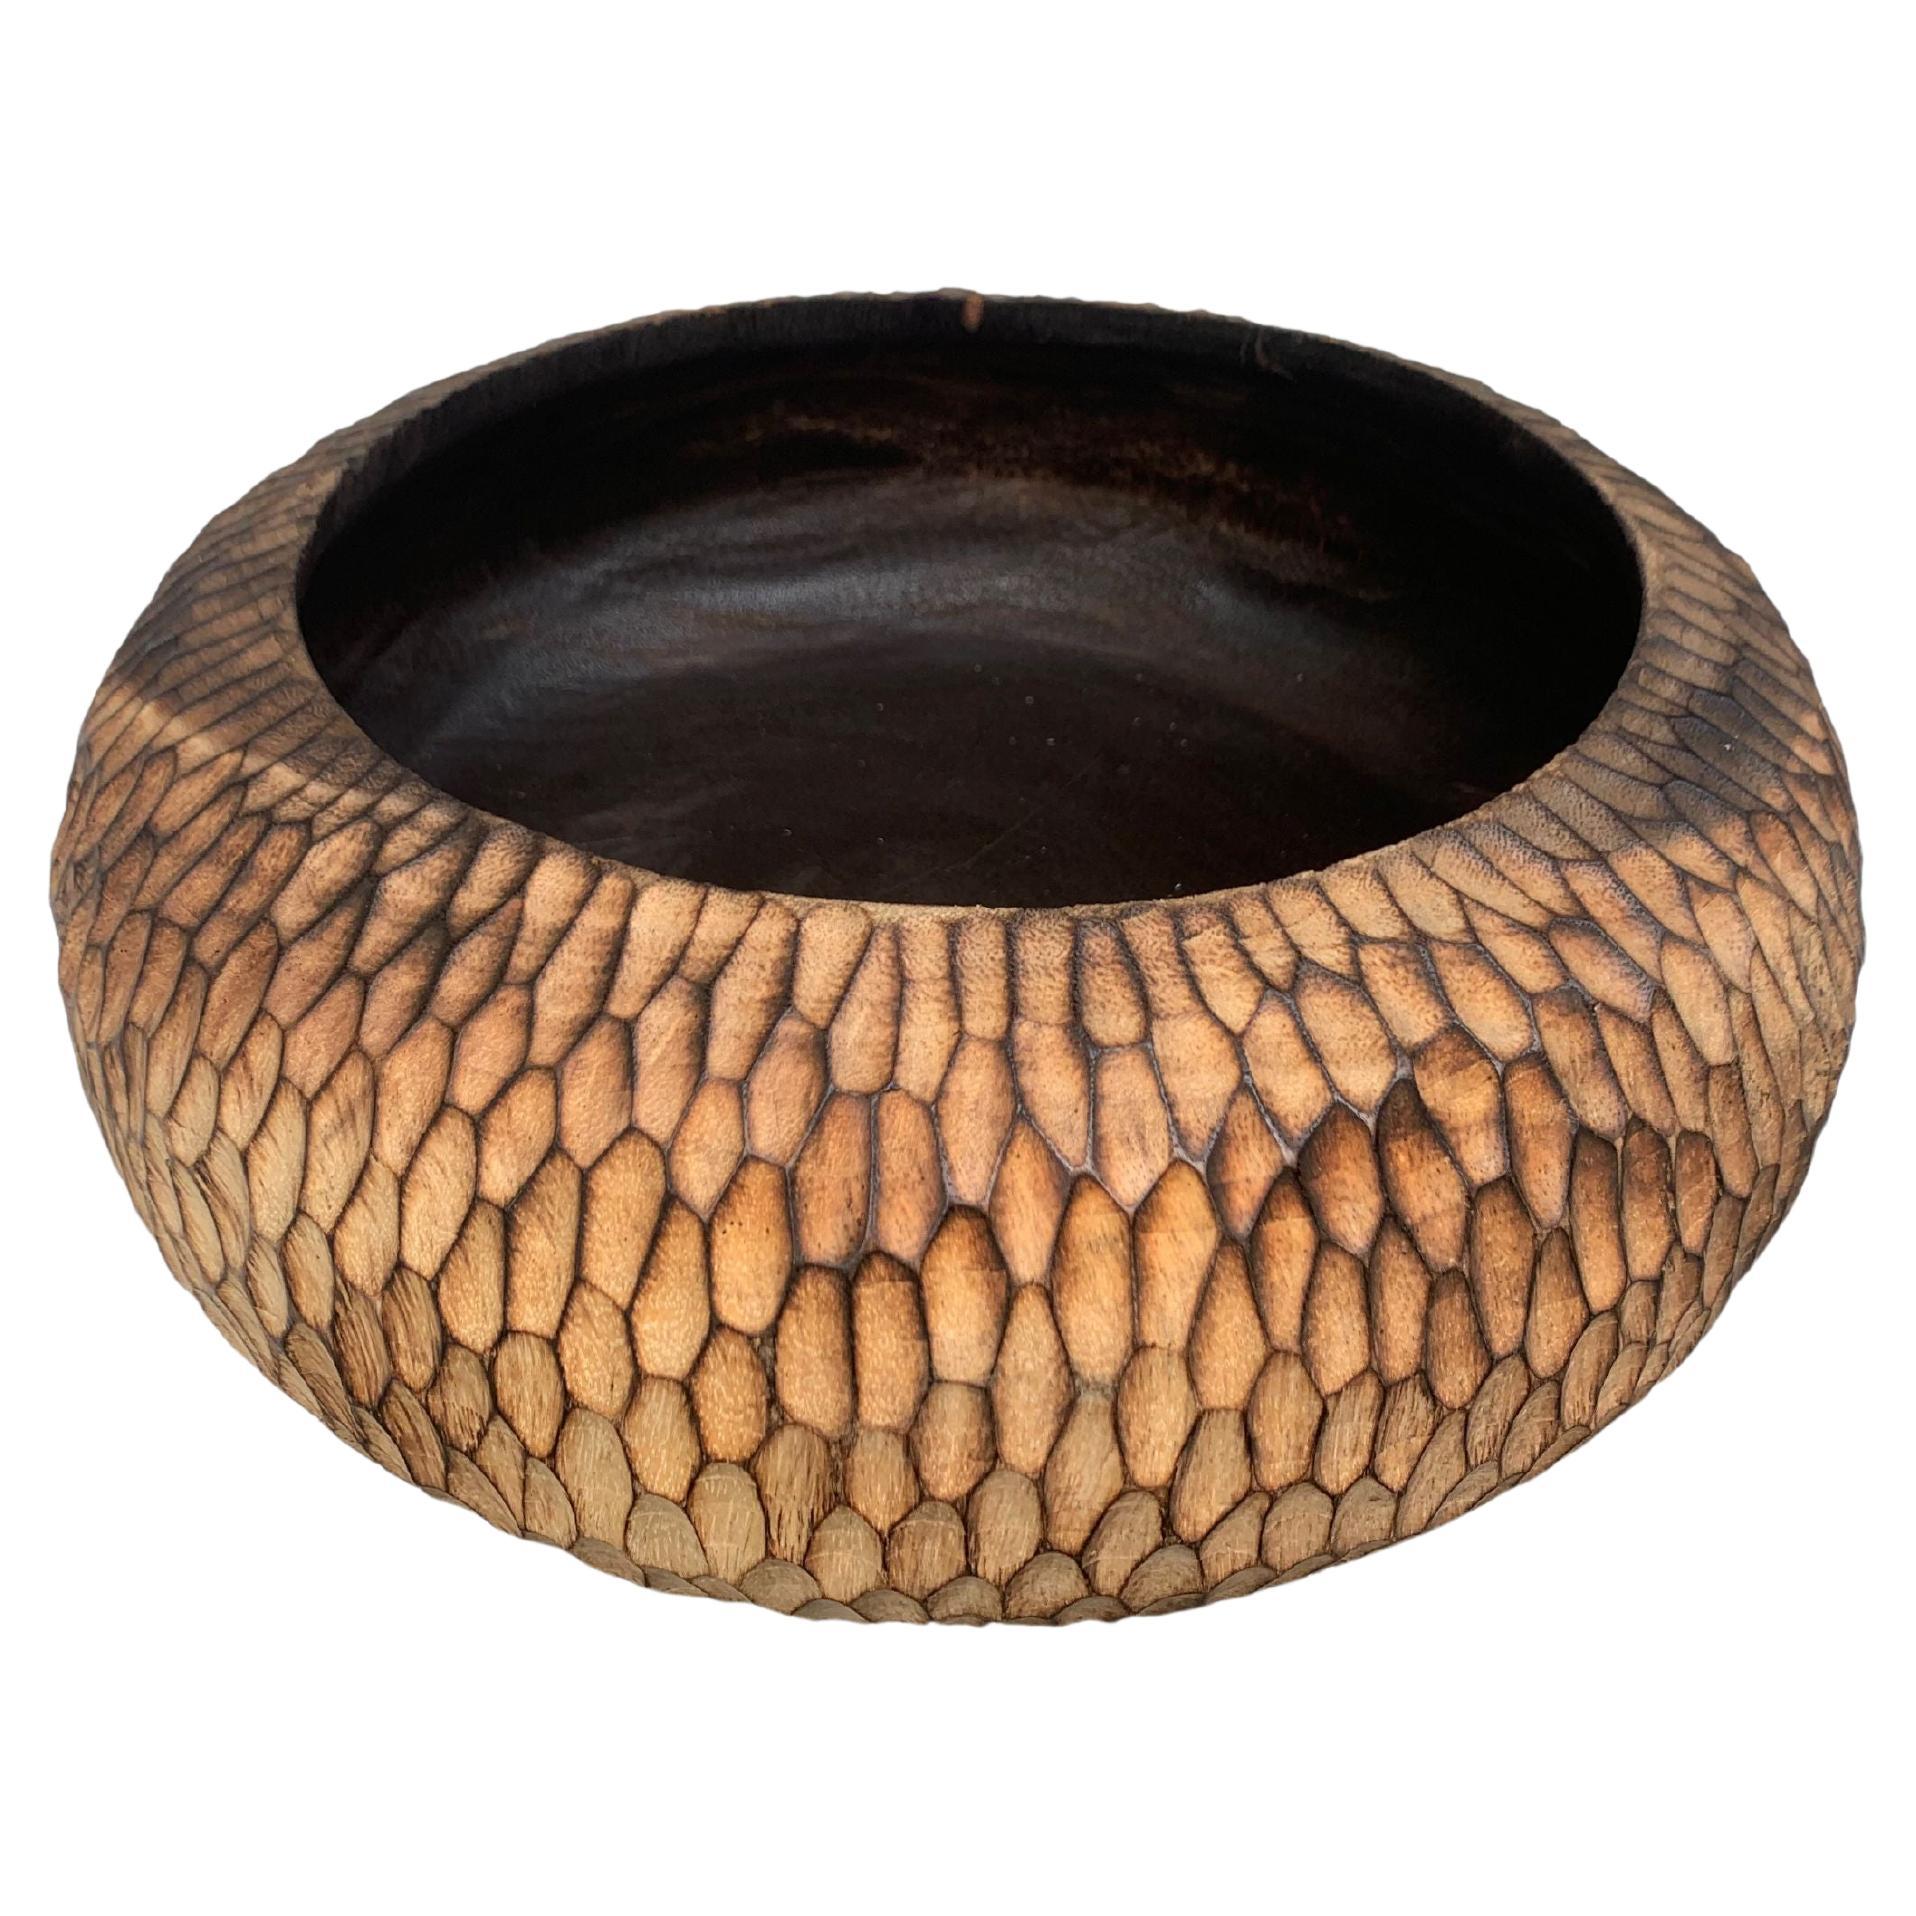 Solid Mango Wood Bowl with Hand-Hewn Detailing and Burnt Detailing For Sale